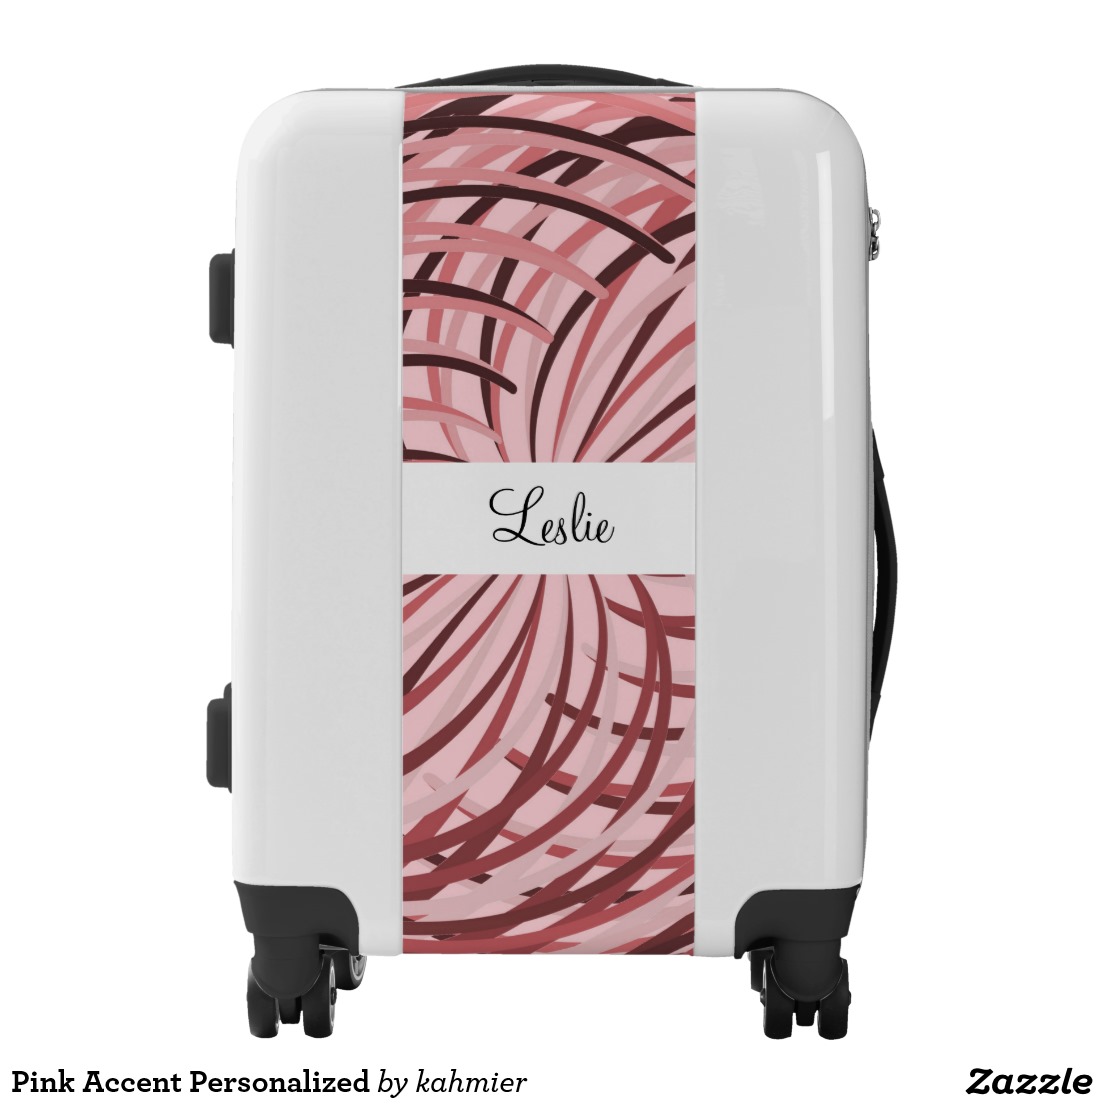 Pink Accent Personalized Luggage